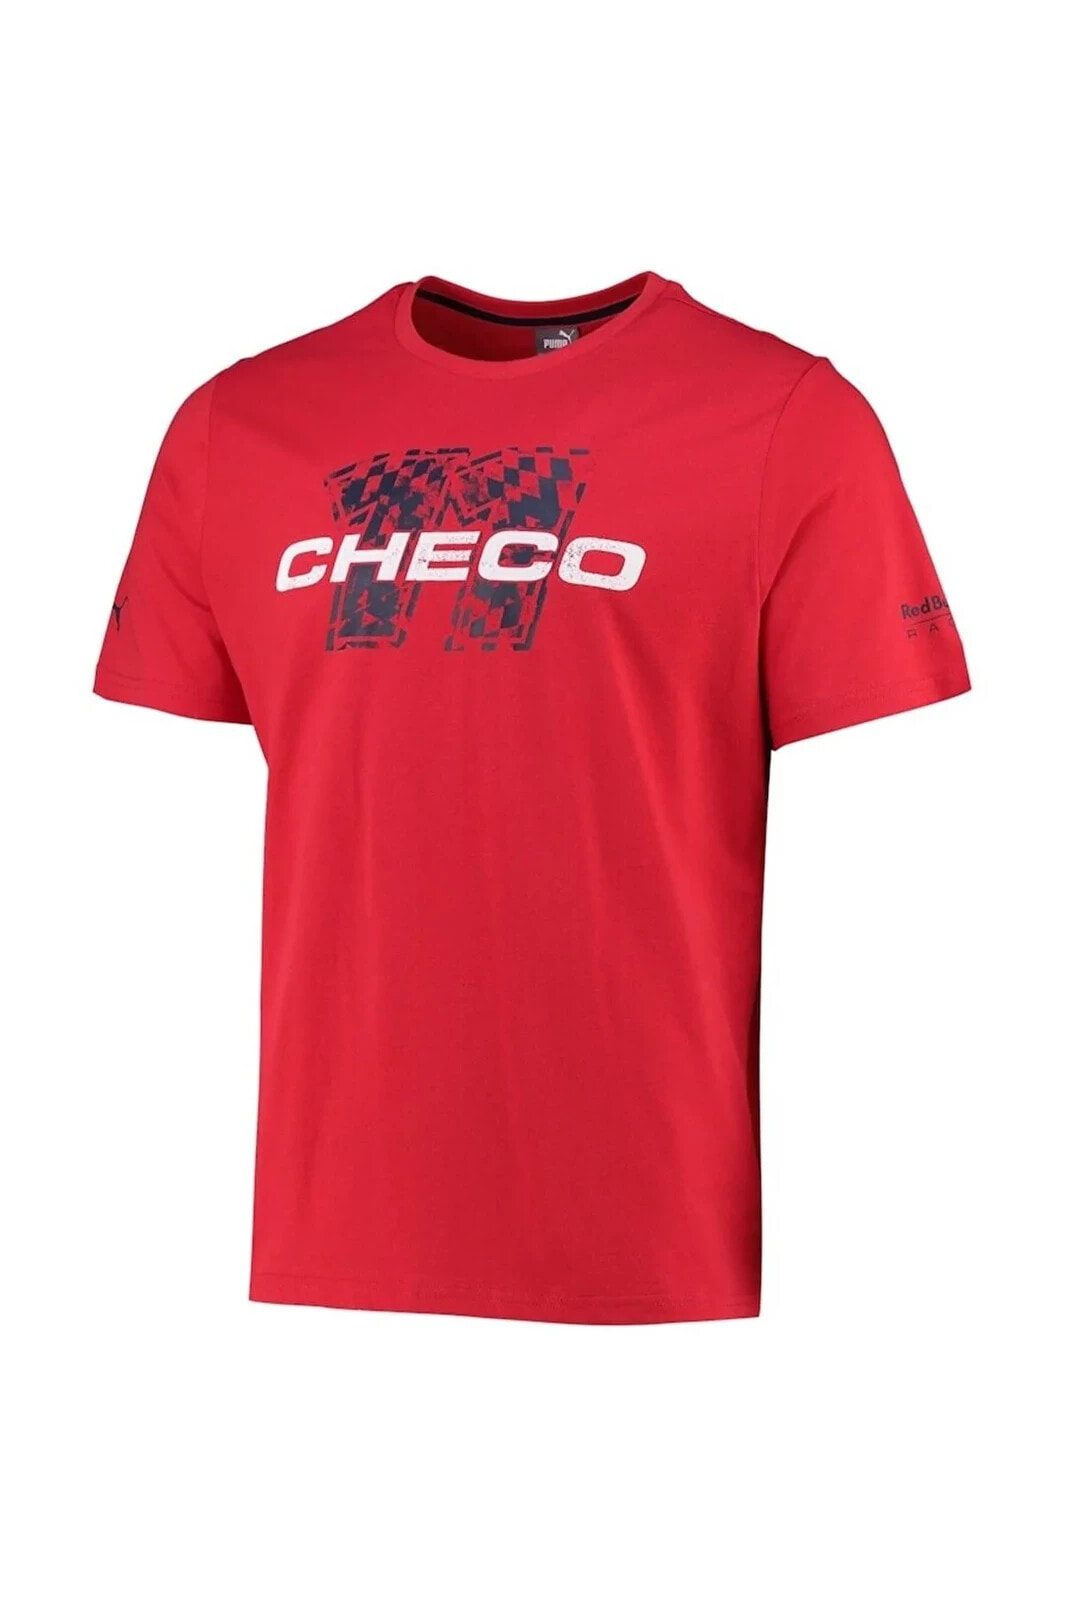 Red Bull Racing Sergio Perez Checo Graphic T-shirt By - Red